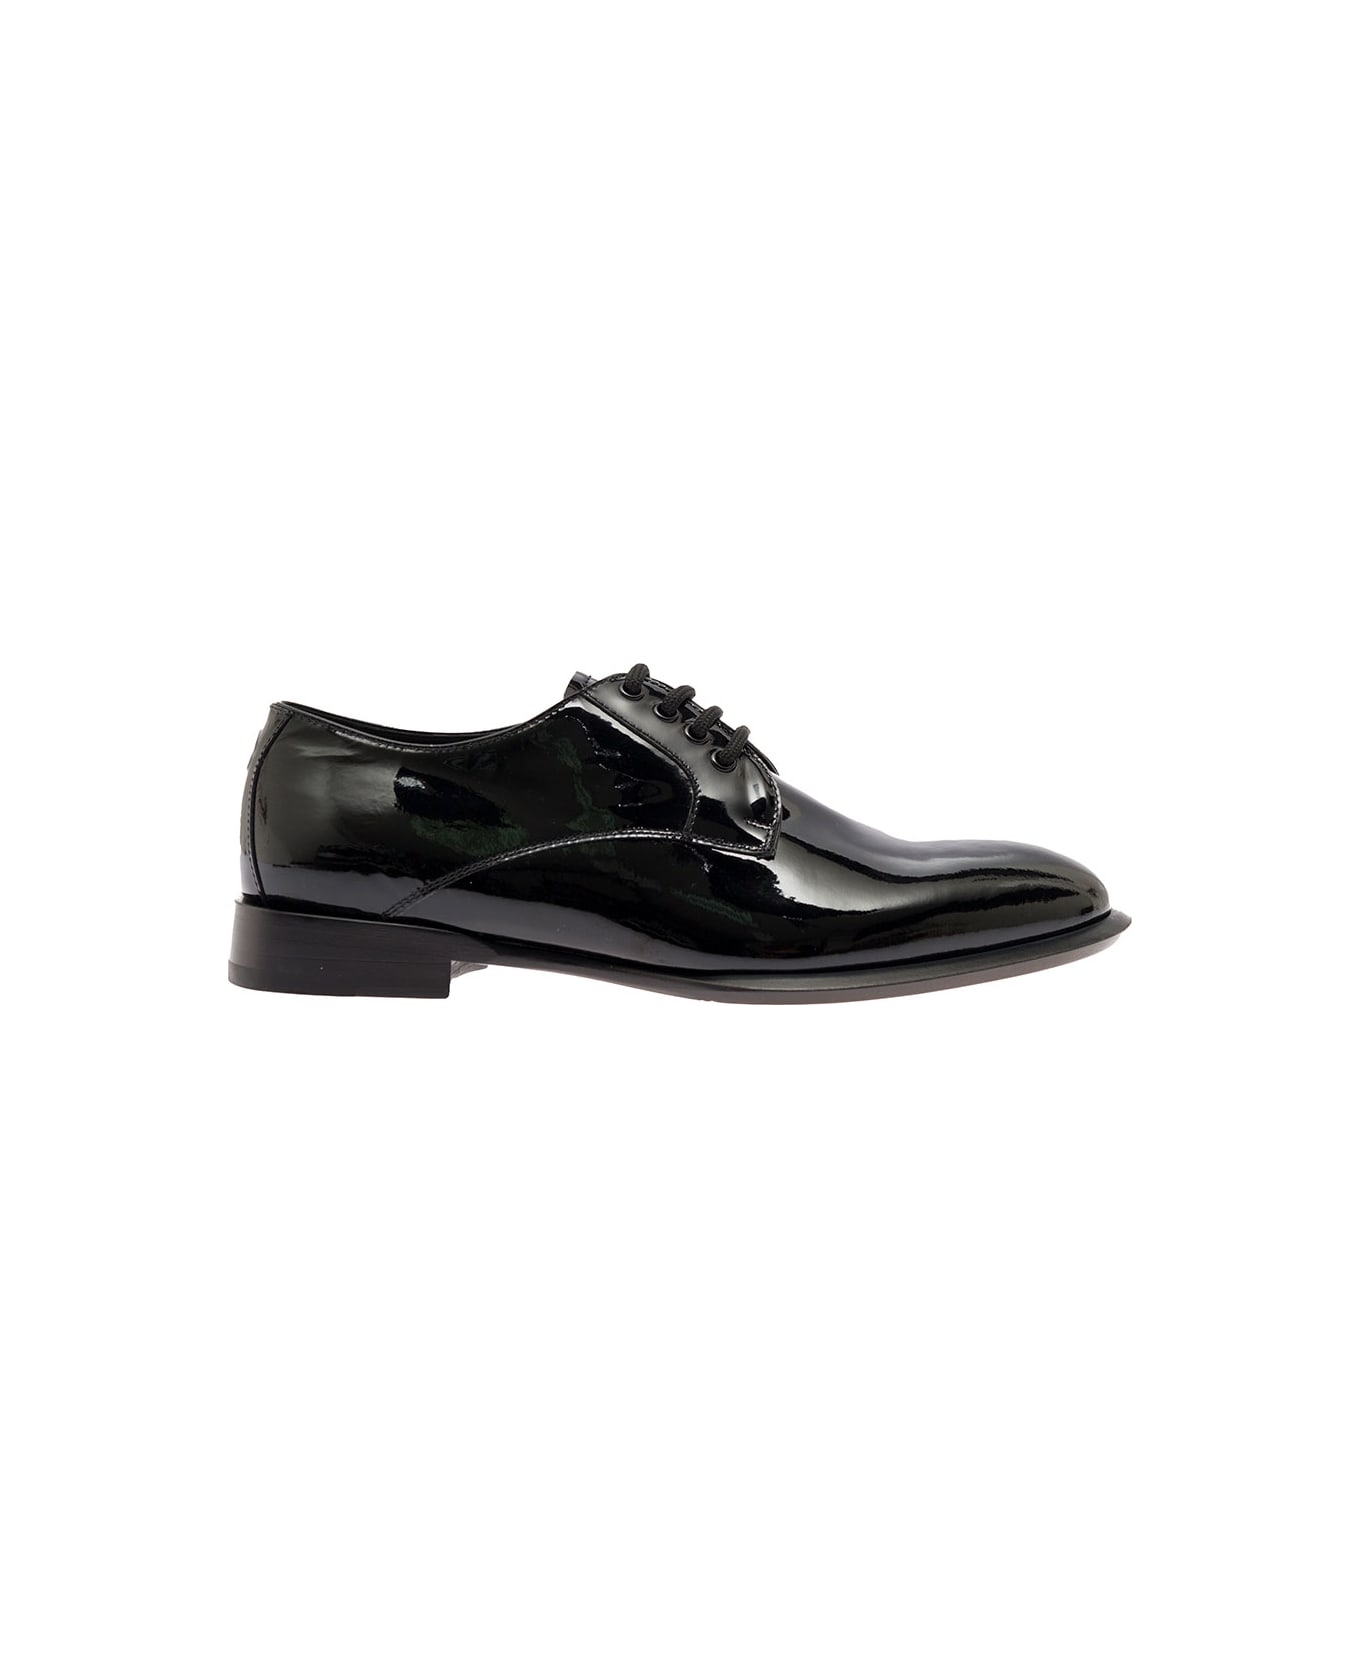 Alexander McQueen Black Oxford Shoes In Patent Leather Man - Black ローファー＆デッキシューズ